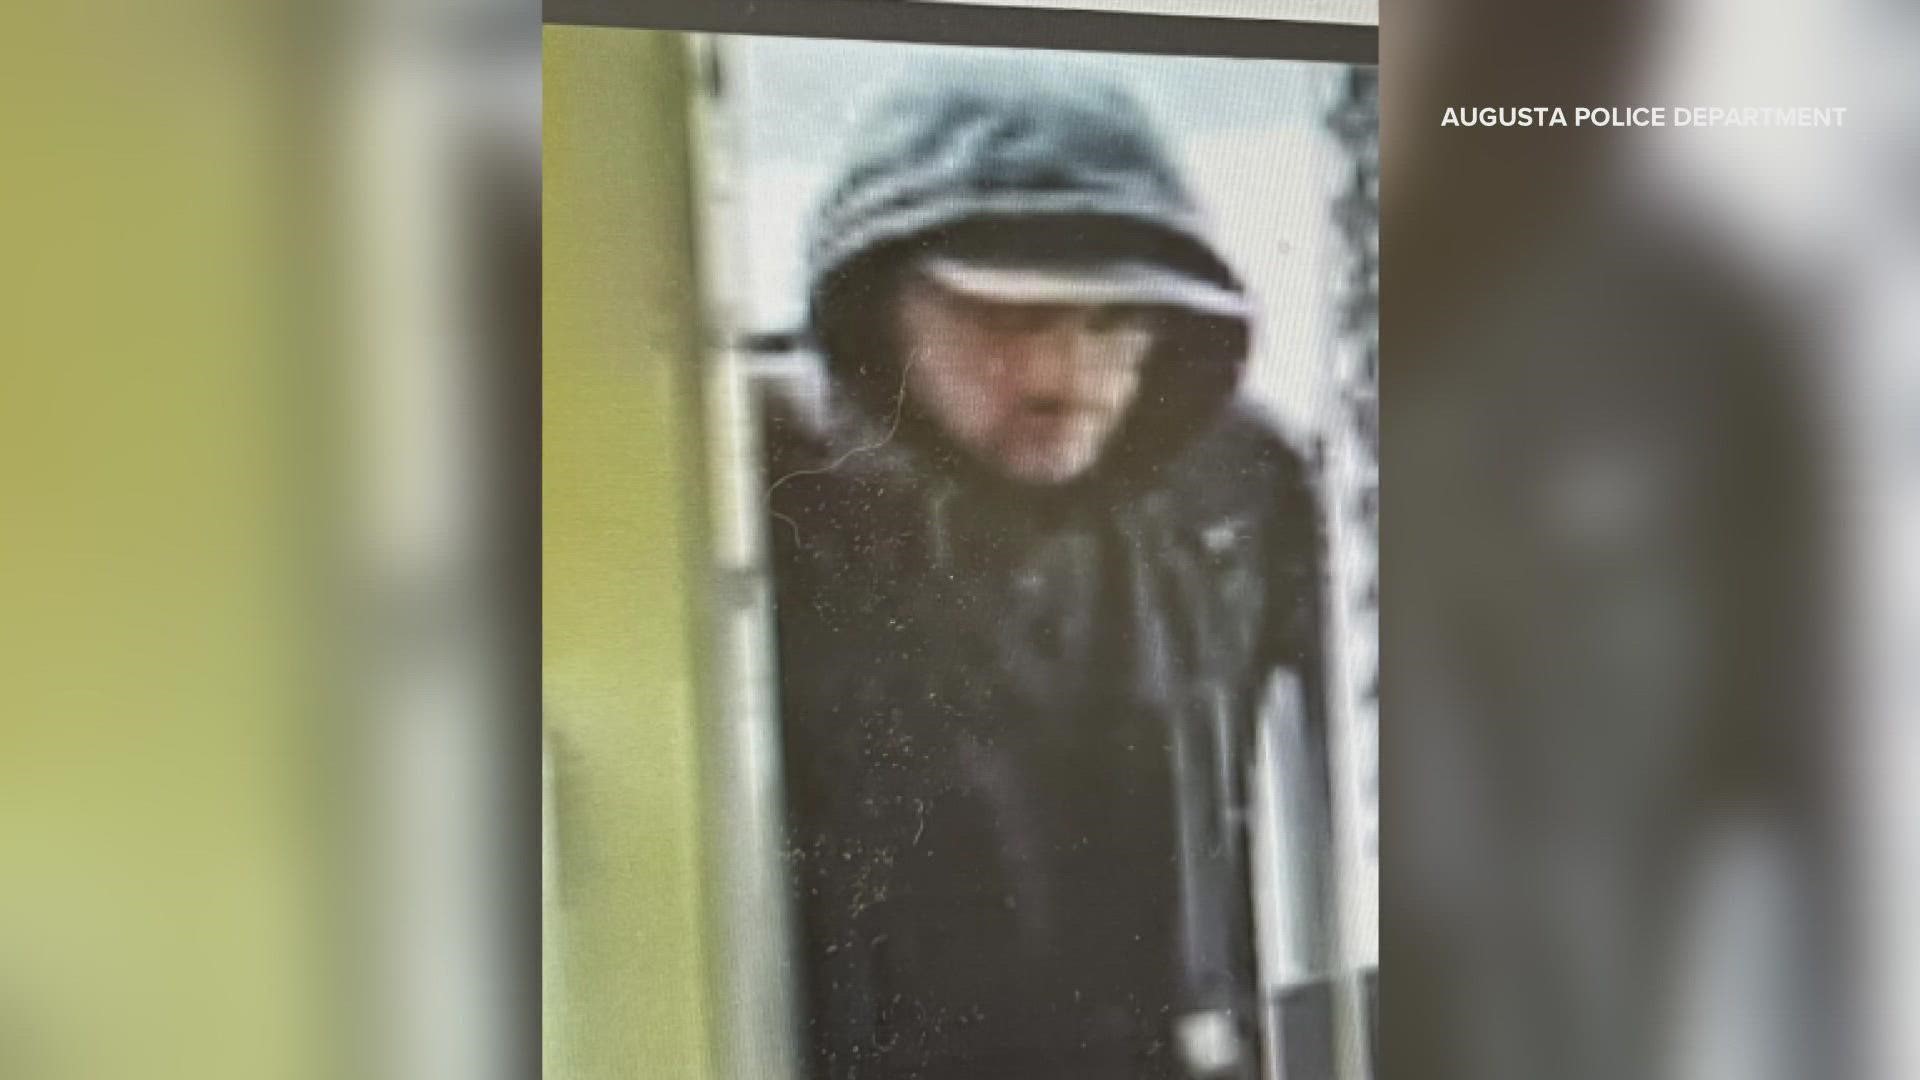 Police are asking the public for information on an alleged robbery that took place at the Big Apple convenience store on Stone Street in Augusta on Friday.